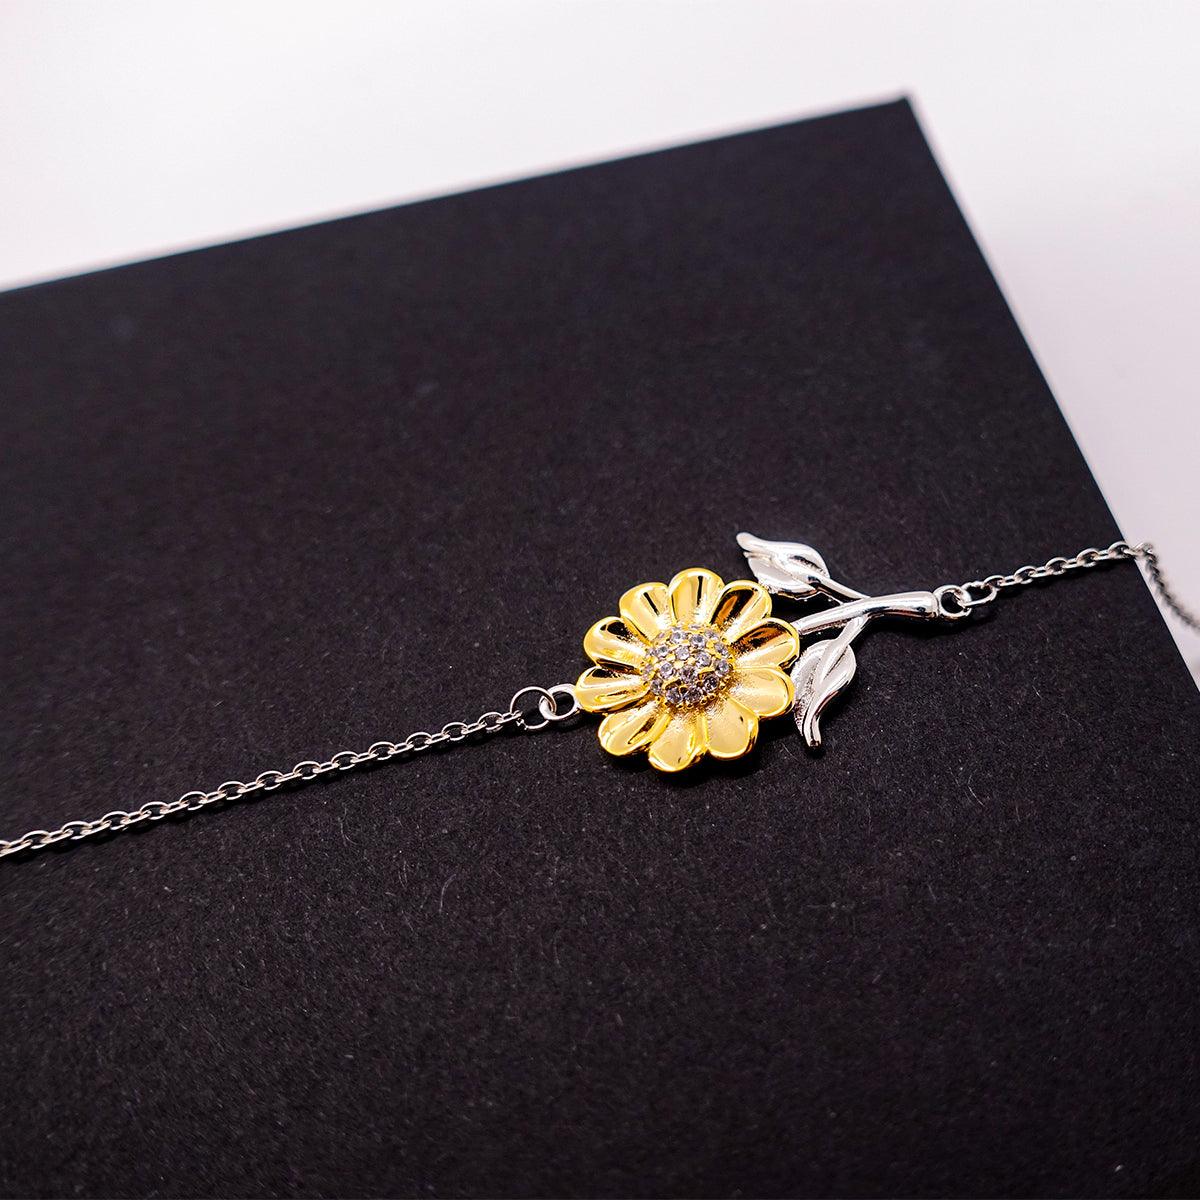 Carpenter Sunflower Bracelet - Thanks for being who you are - Birthday Christmas Jewelry Gifts Coworkers Colleague Boss - Mallard Moon Gift Shop